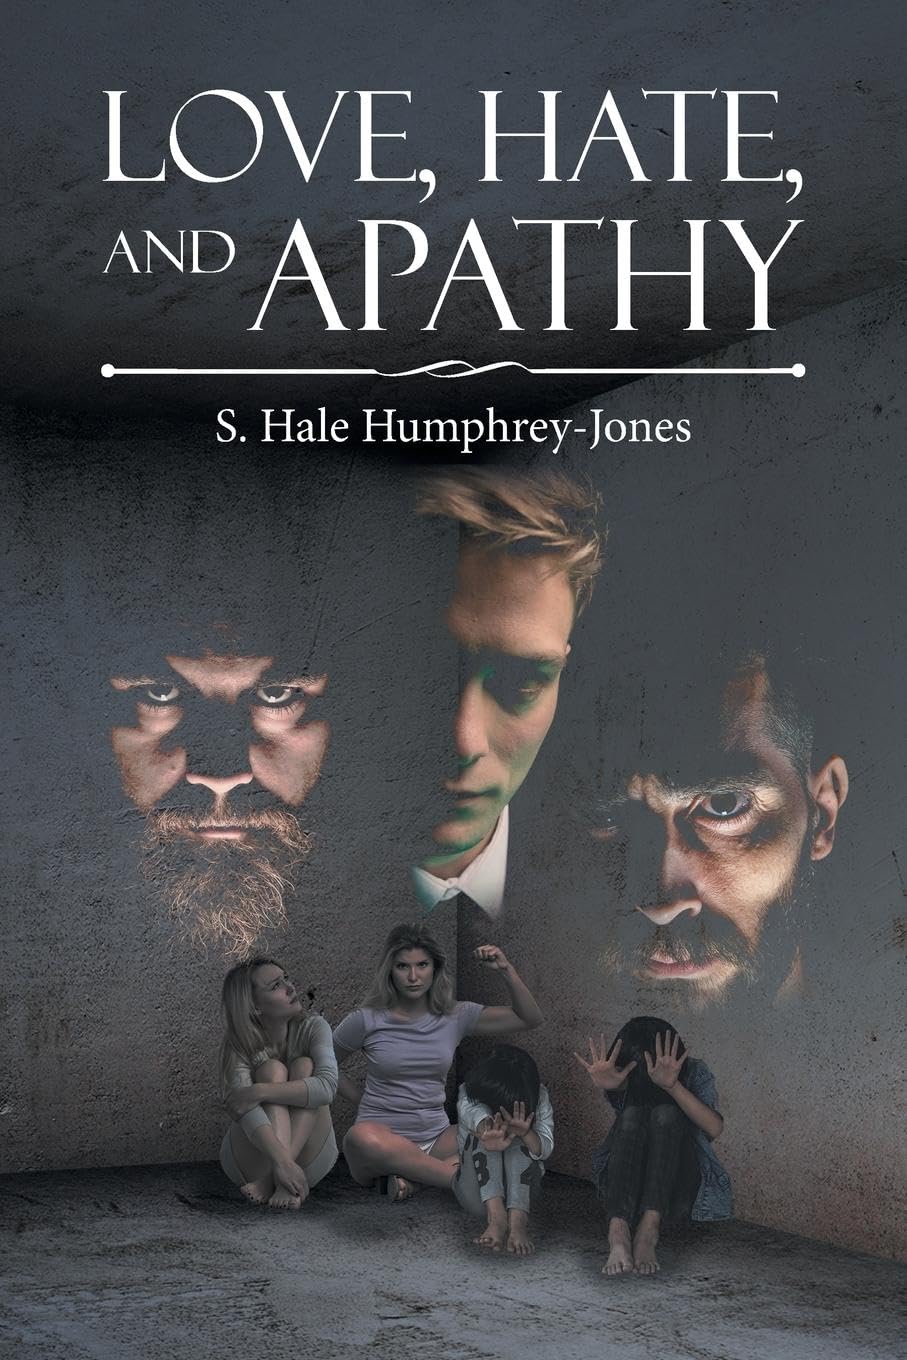 Breaking Chains: Exploring Abuse and Healing in 'Love, Hate, and Apathy by S. Hale Humphrey-Jones 